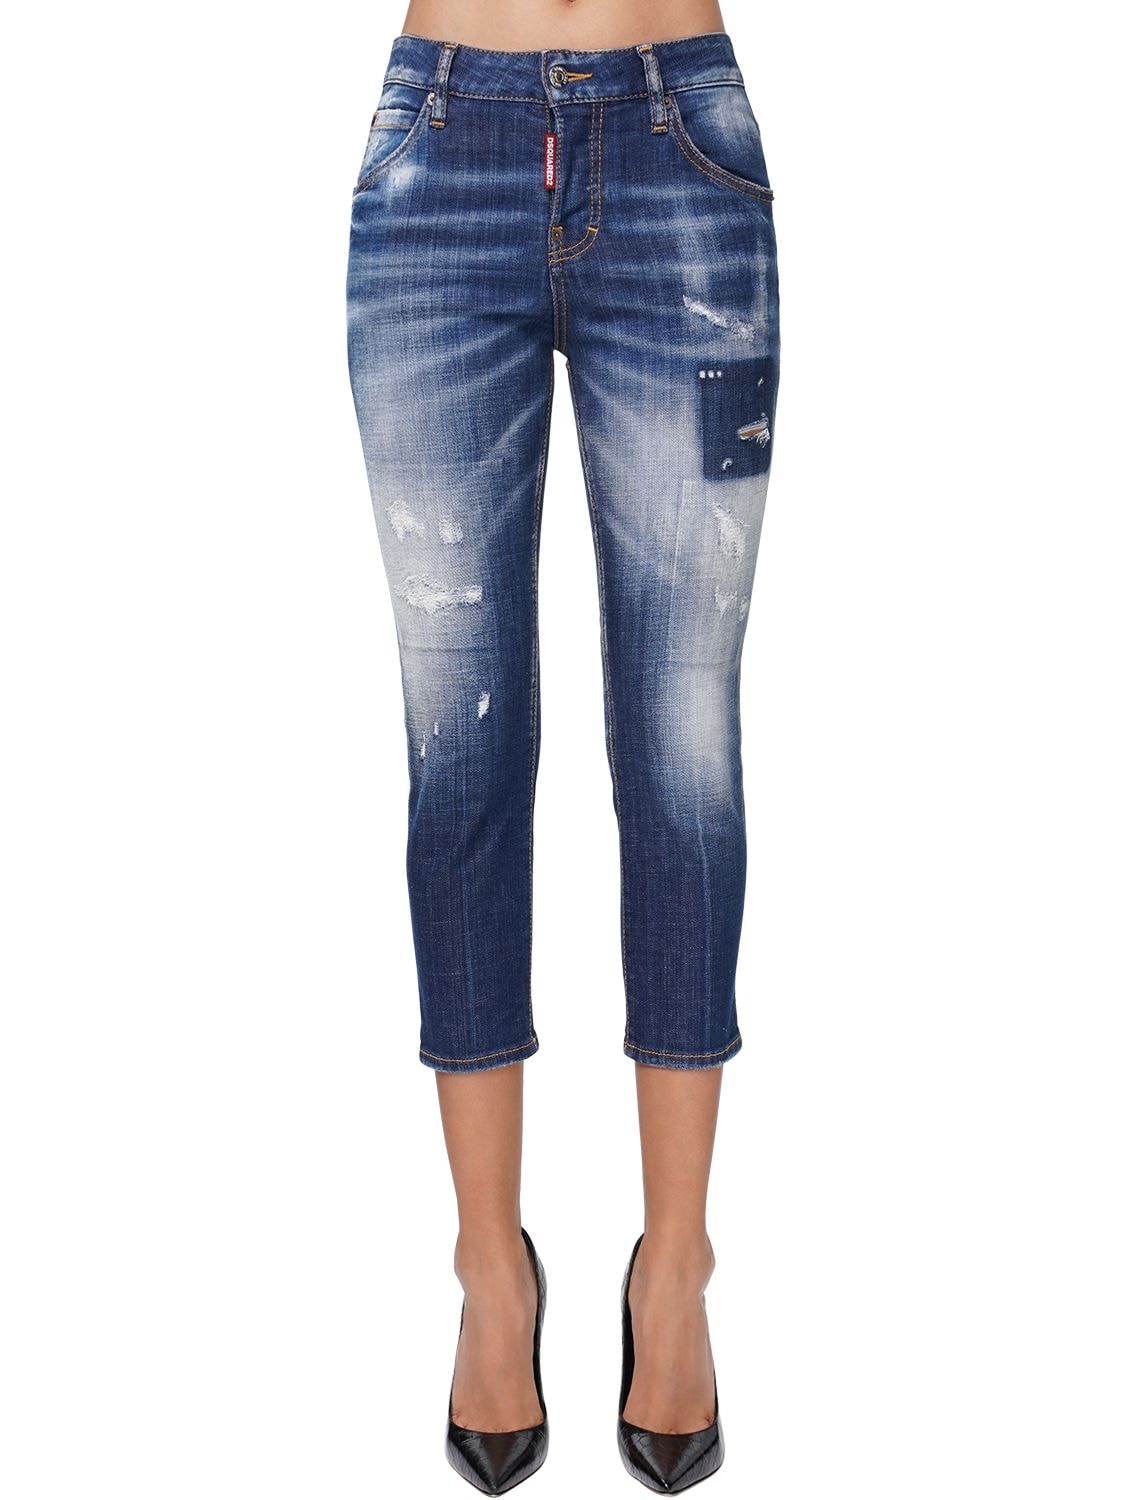 DSQUARED2 COOL GIRL CROPPED DENIM JEANS,71IAGF059-NDCW0